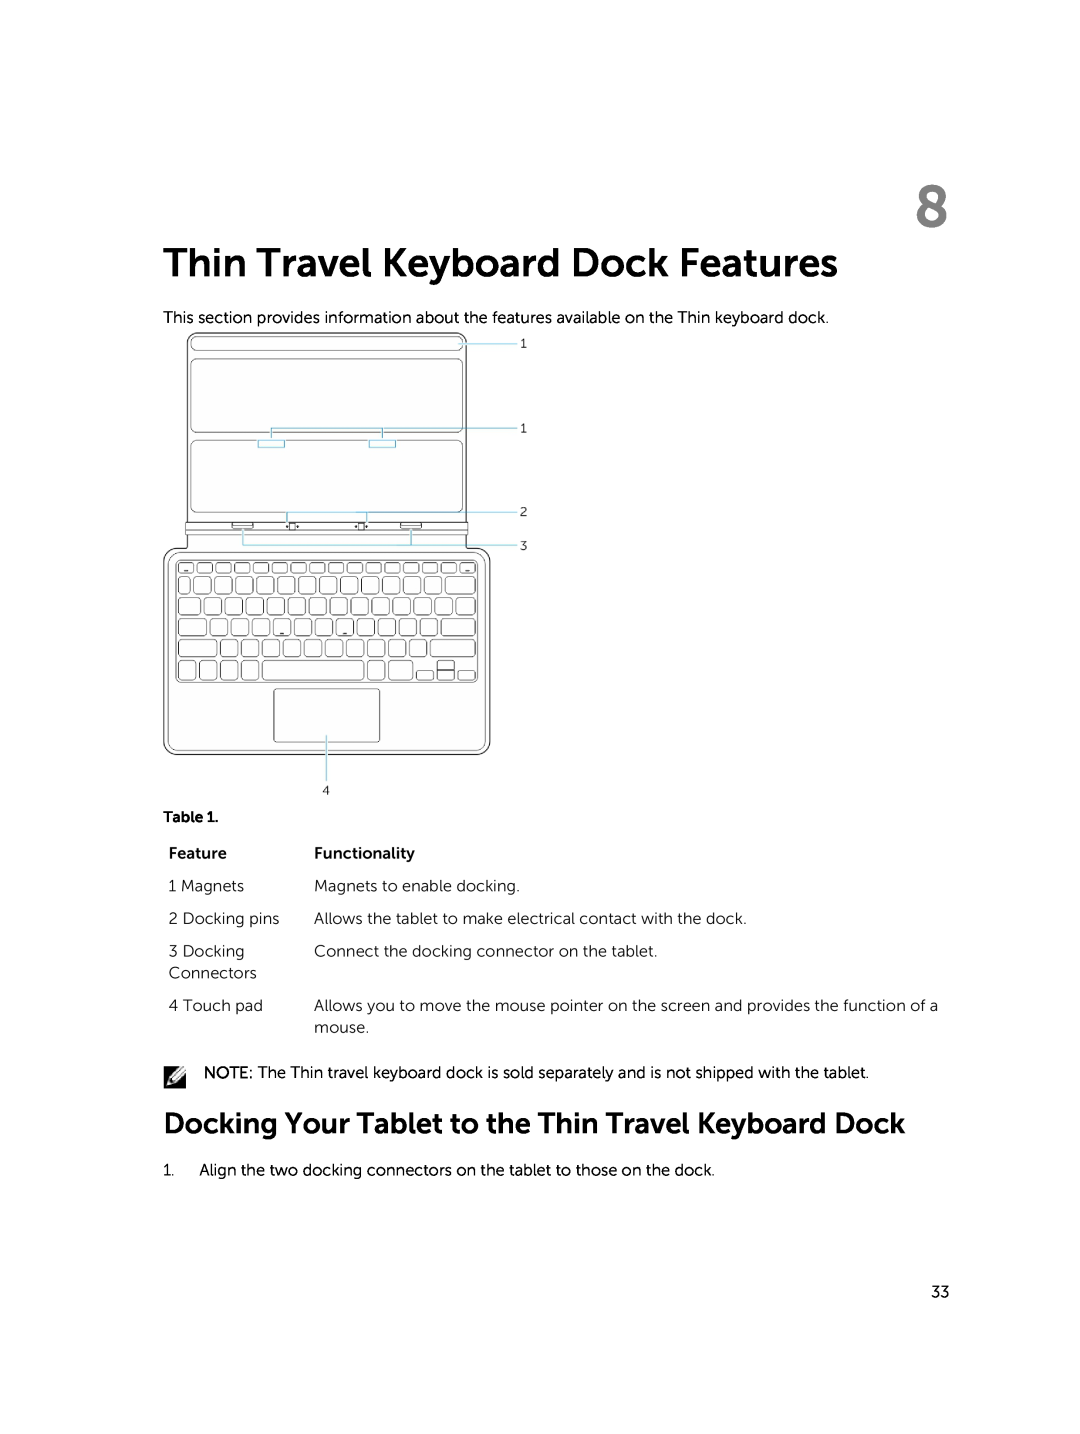 Dell PRO11I6363BLK, T07G manual Thin Travel Keyboard Dock Features, Docking Your Tablet to the Thin Travel Keyboard Dock 